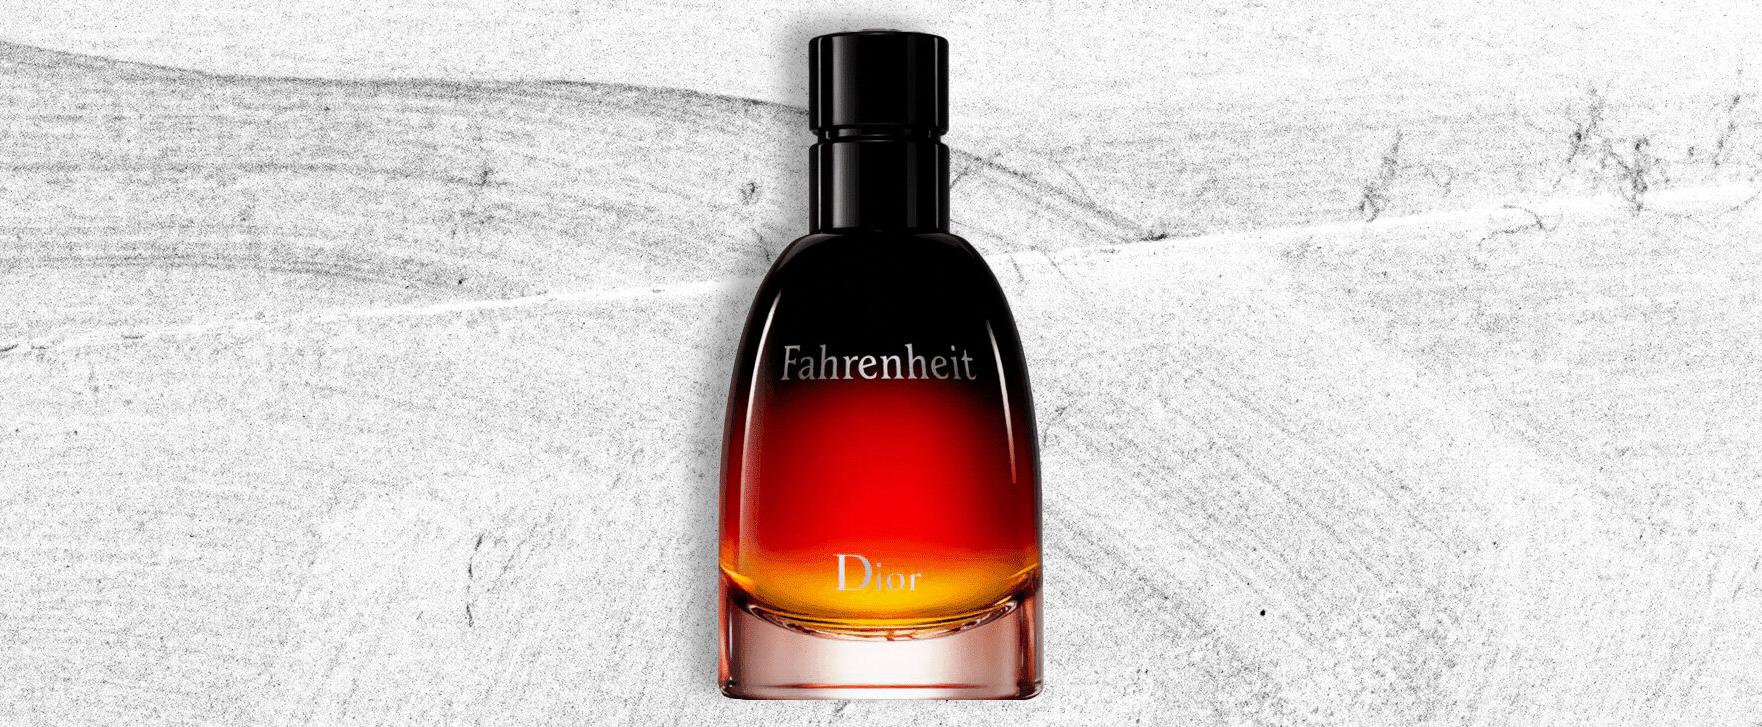 Fahrenheit - a perfume on a Different Scale